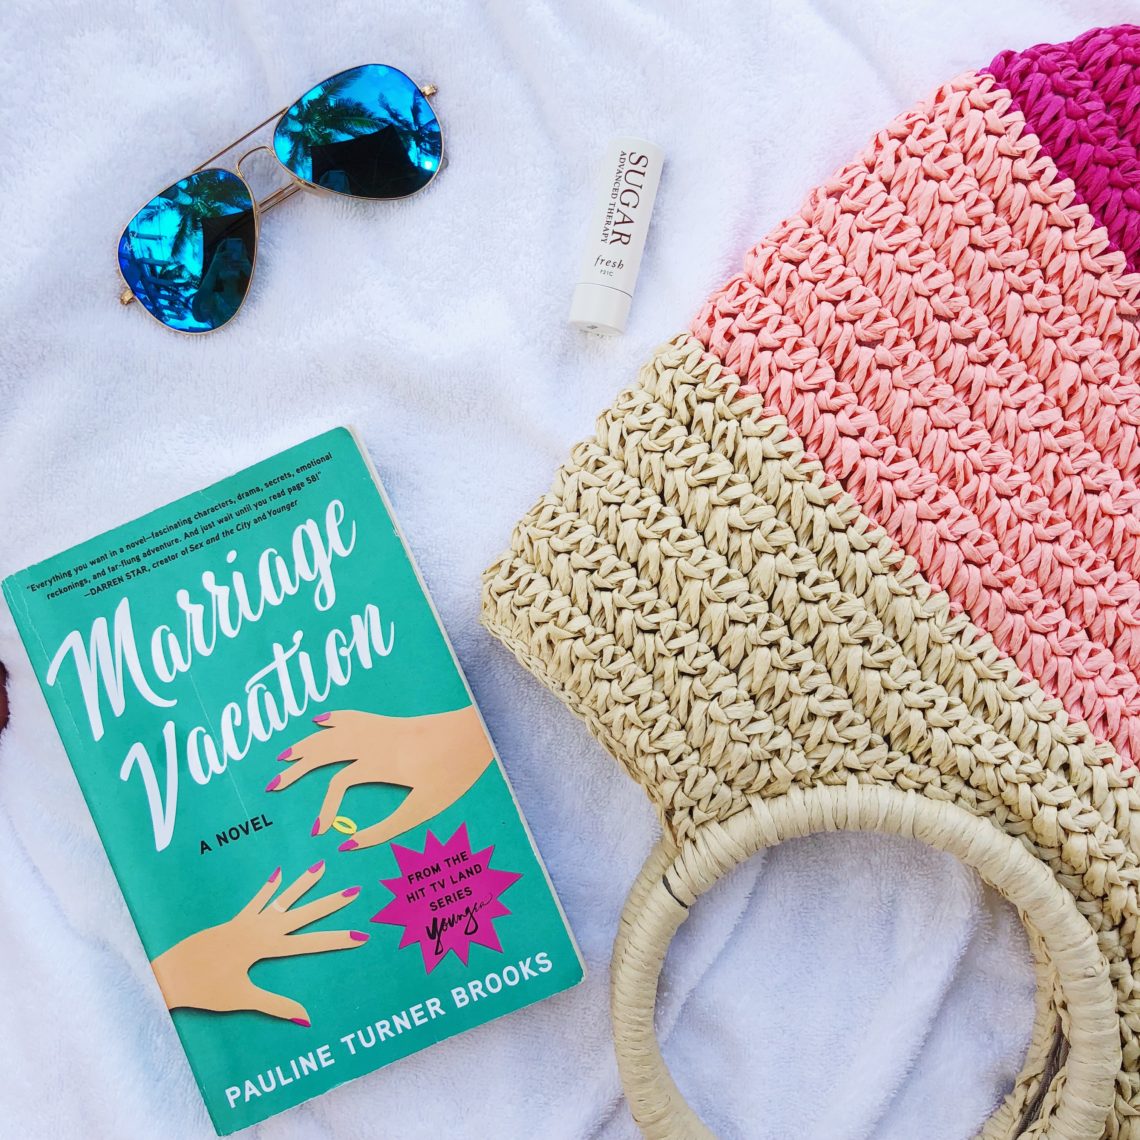 Marriage Vacation book // the modern savvy - Alyson's Current Favorites // June 2018, featured by popular Florida style blogger, The Modern Savvy